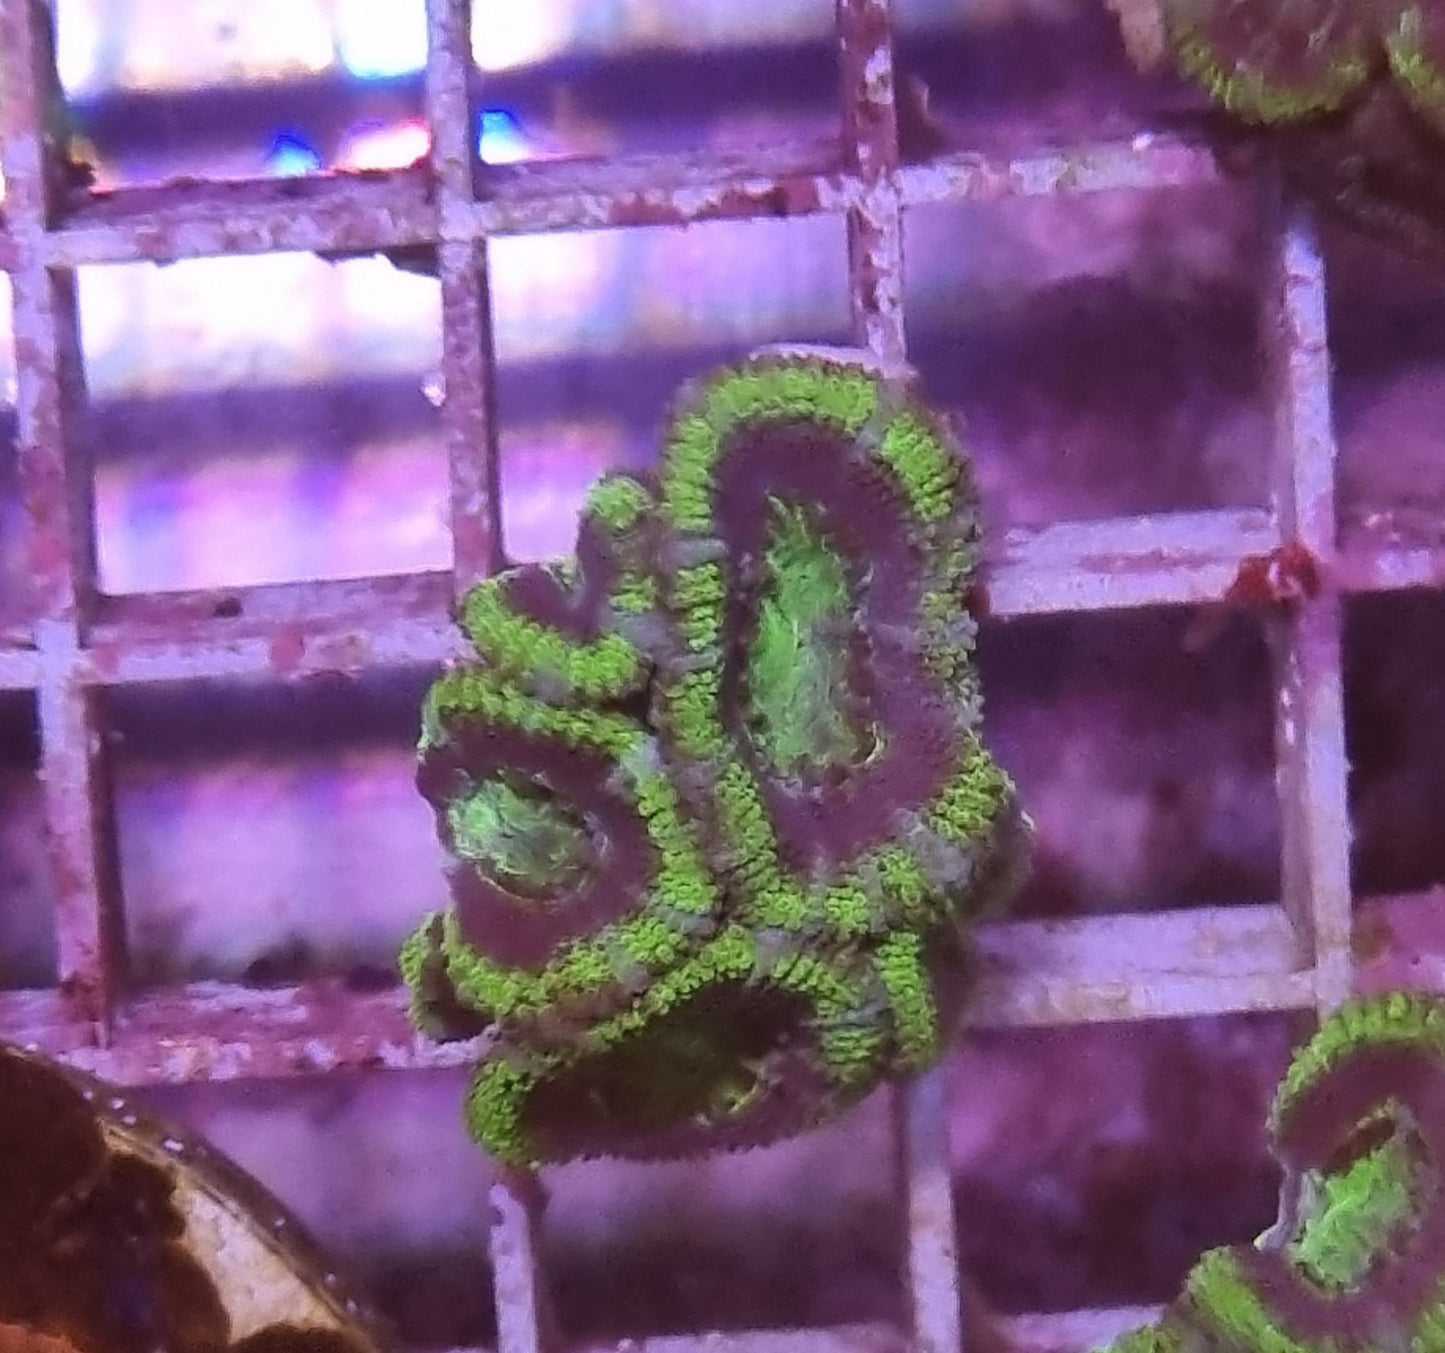 Micromussa lordhowensis (Acan) - Green